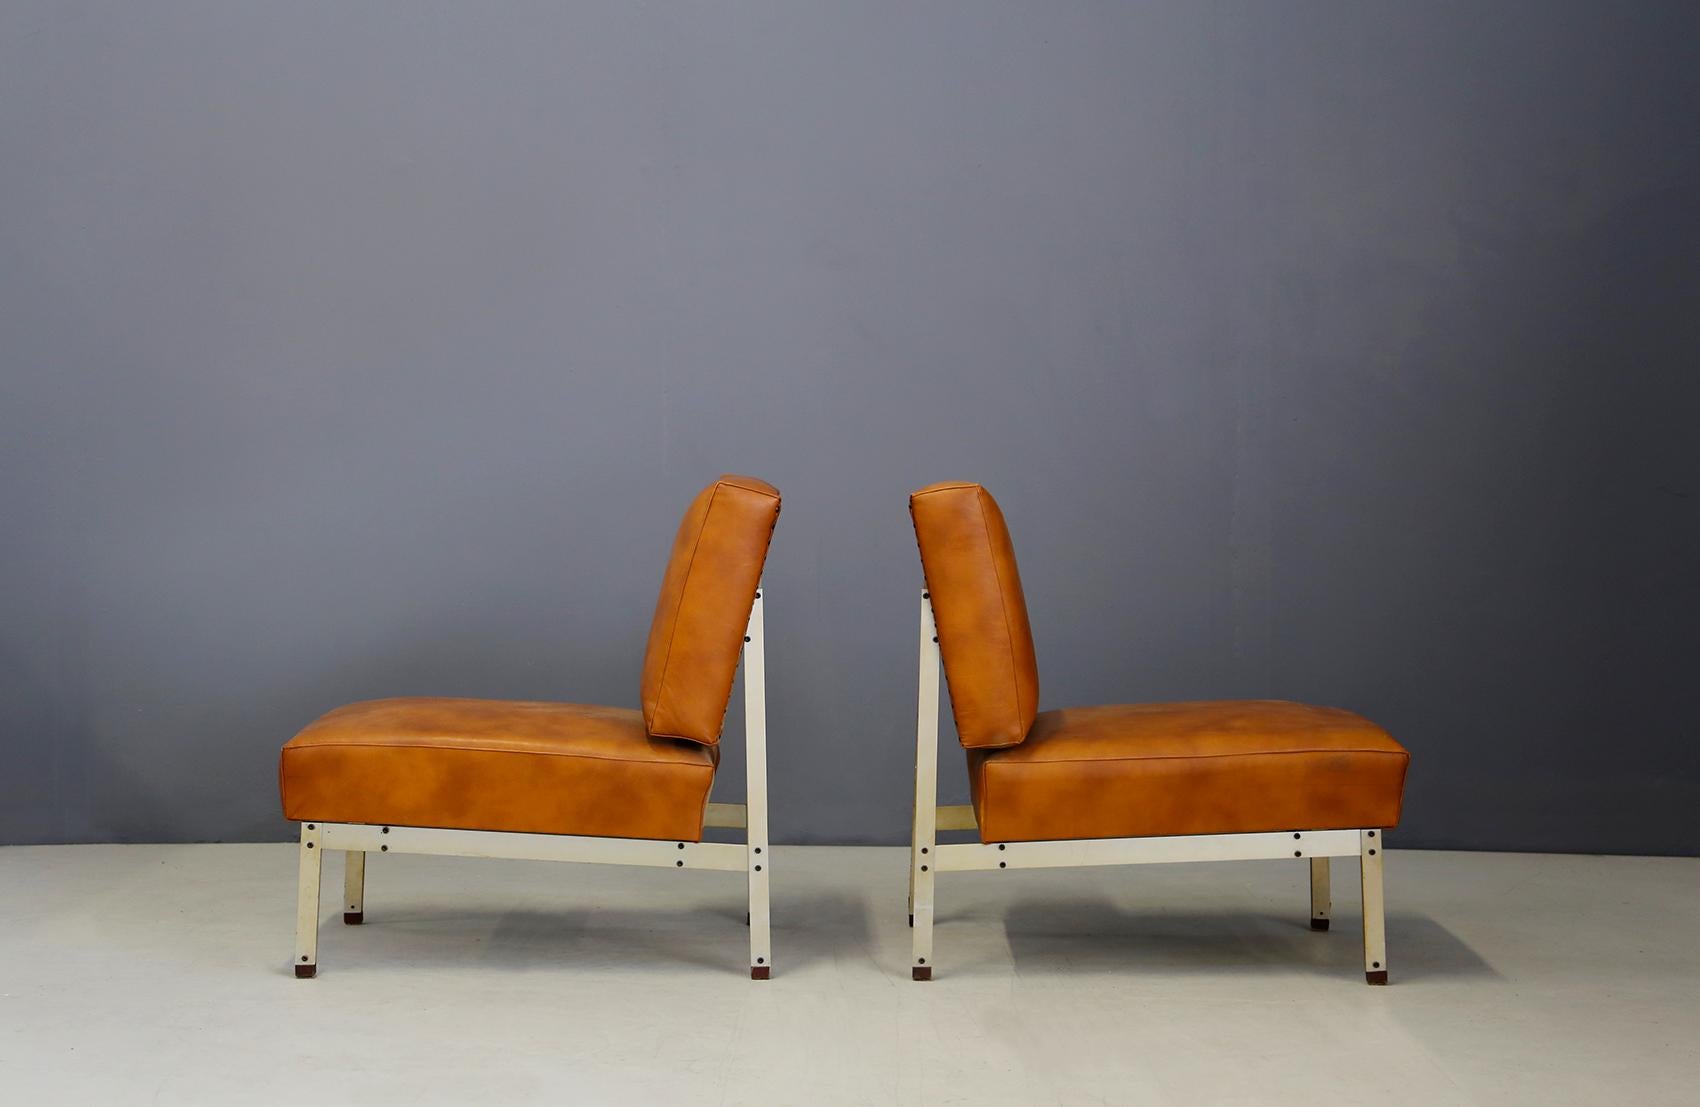 Pair of armchairs in the style of Florence Knoll from 1950. The armchairs have a steel frame inserted in a very linear way with clean and essential lines. Its seat and backrest cover is in light brown leather in perfect condition. In the back of the